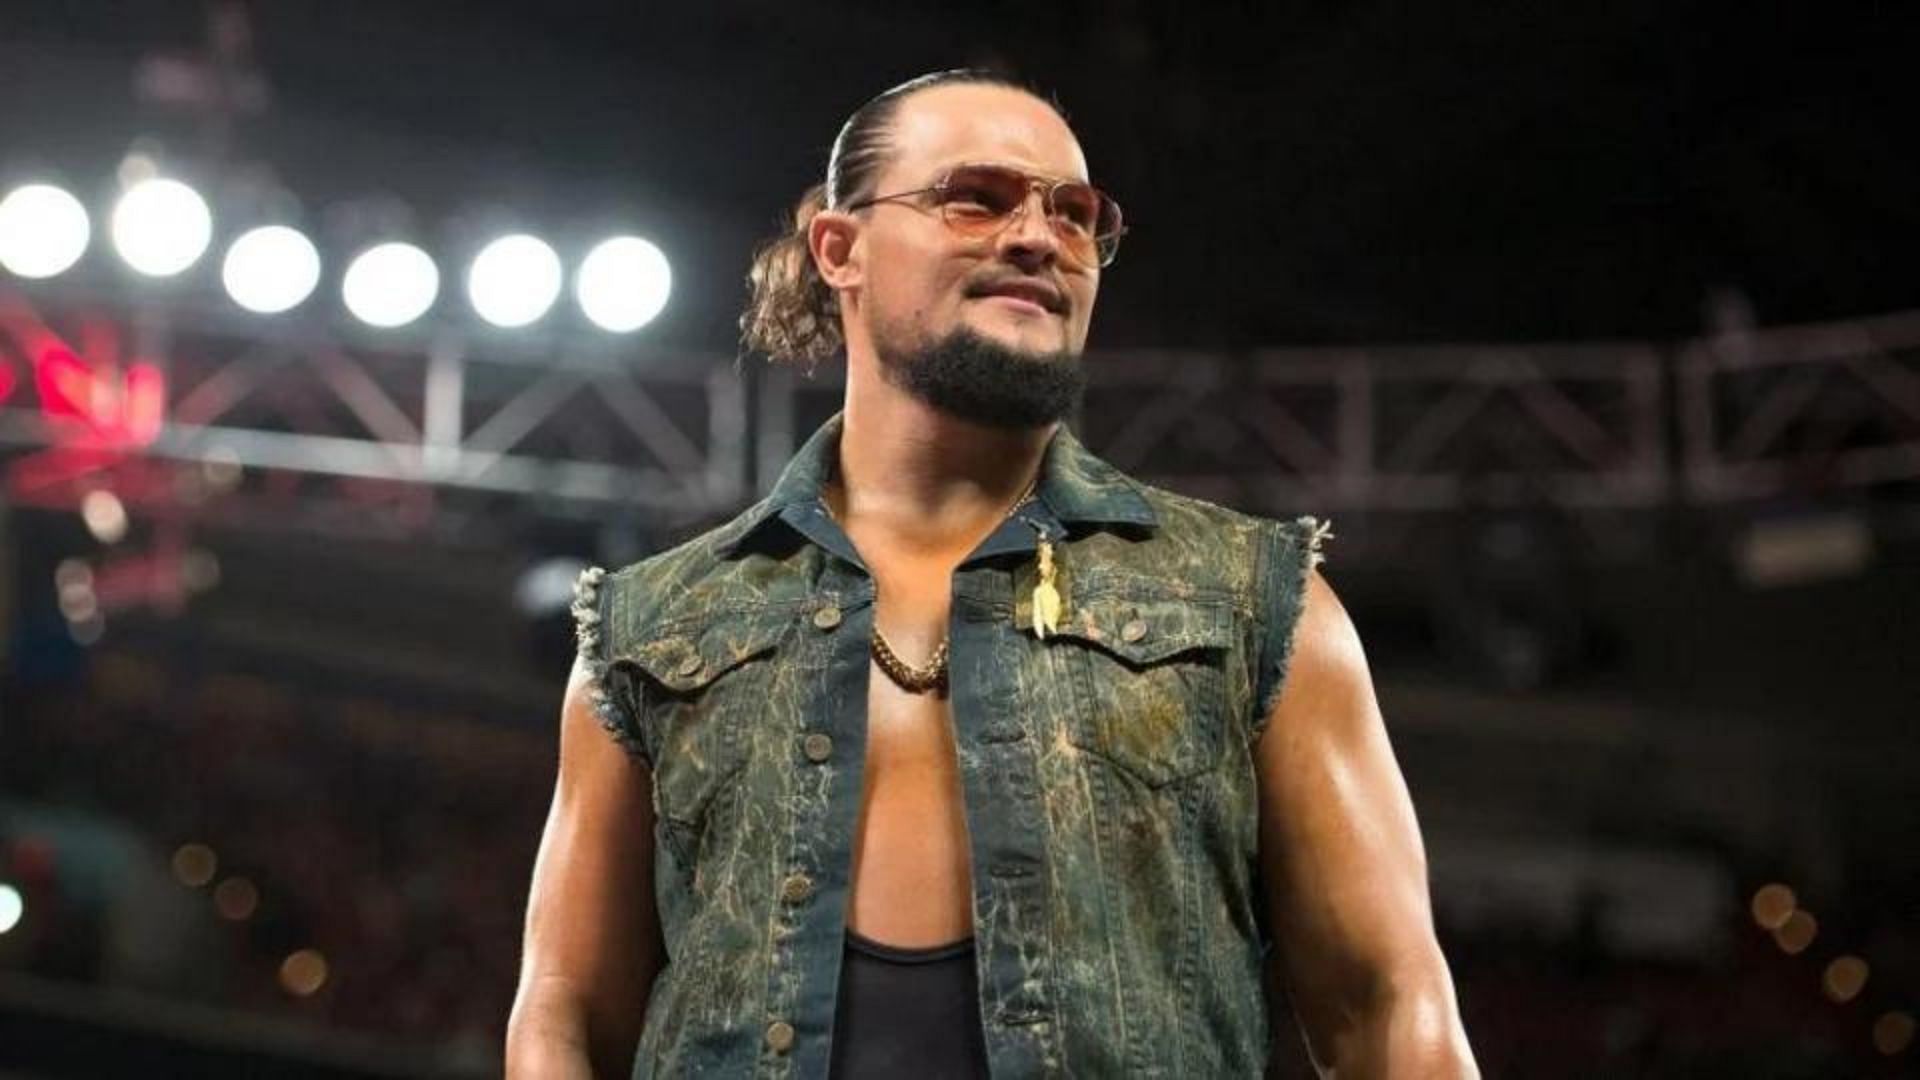 Bo Dallas is the real-life brother of Bray Wyatt, and also a WWE Superstar